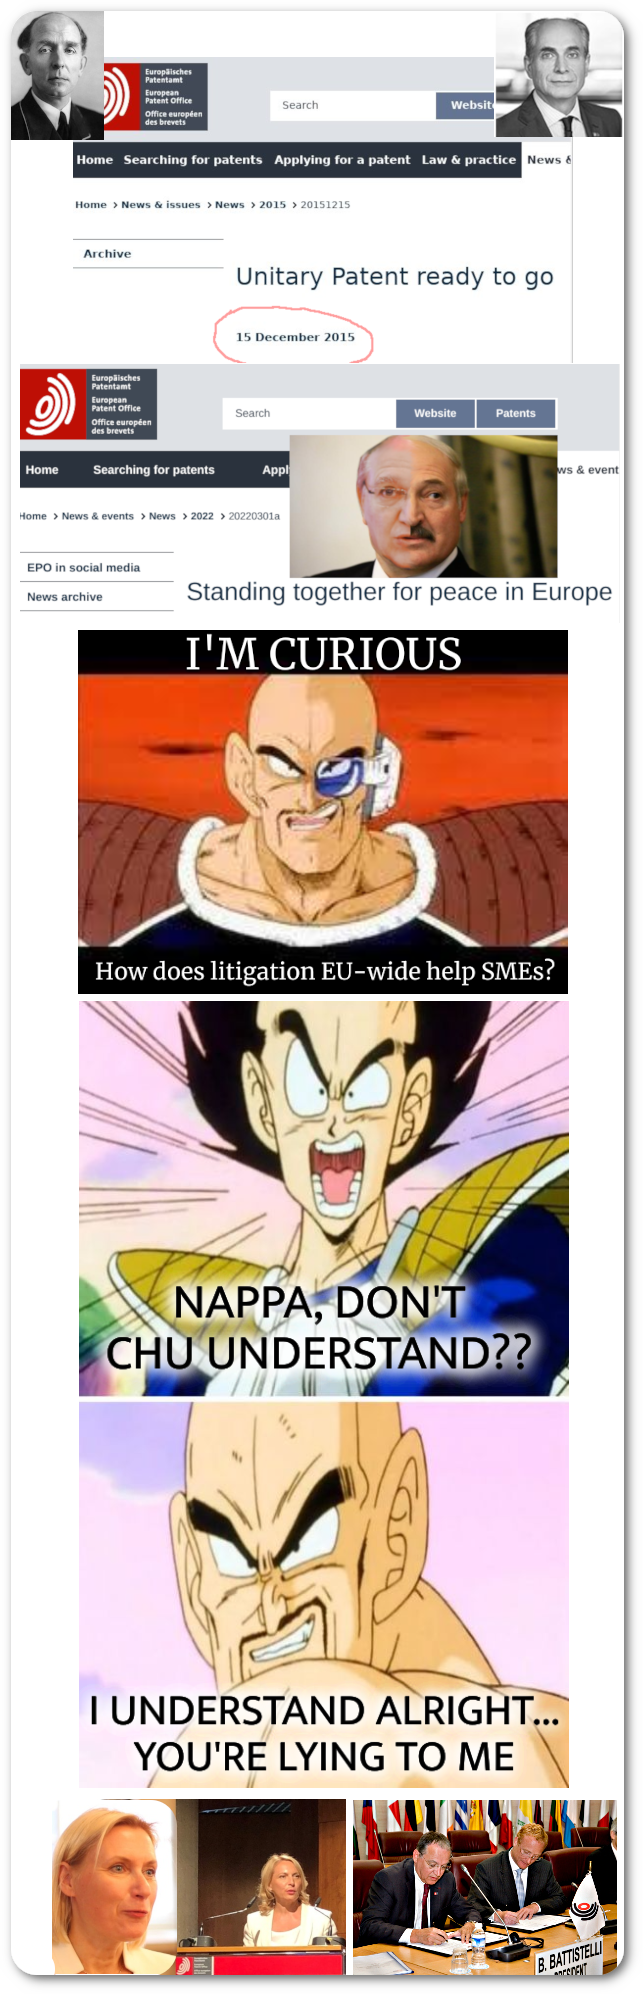 I'm Curious; How does litigation EU-wide help SMEs? Nappa, don't chu understand?? I understand alright... you're lying to me